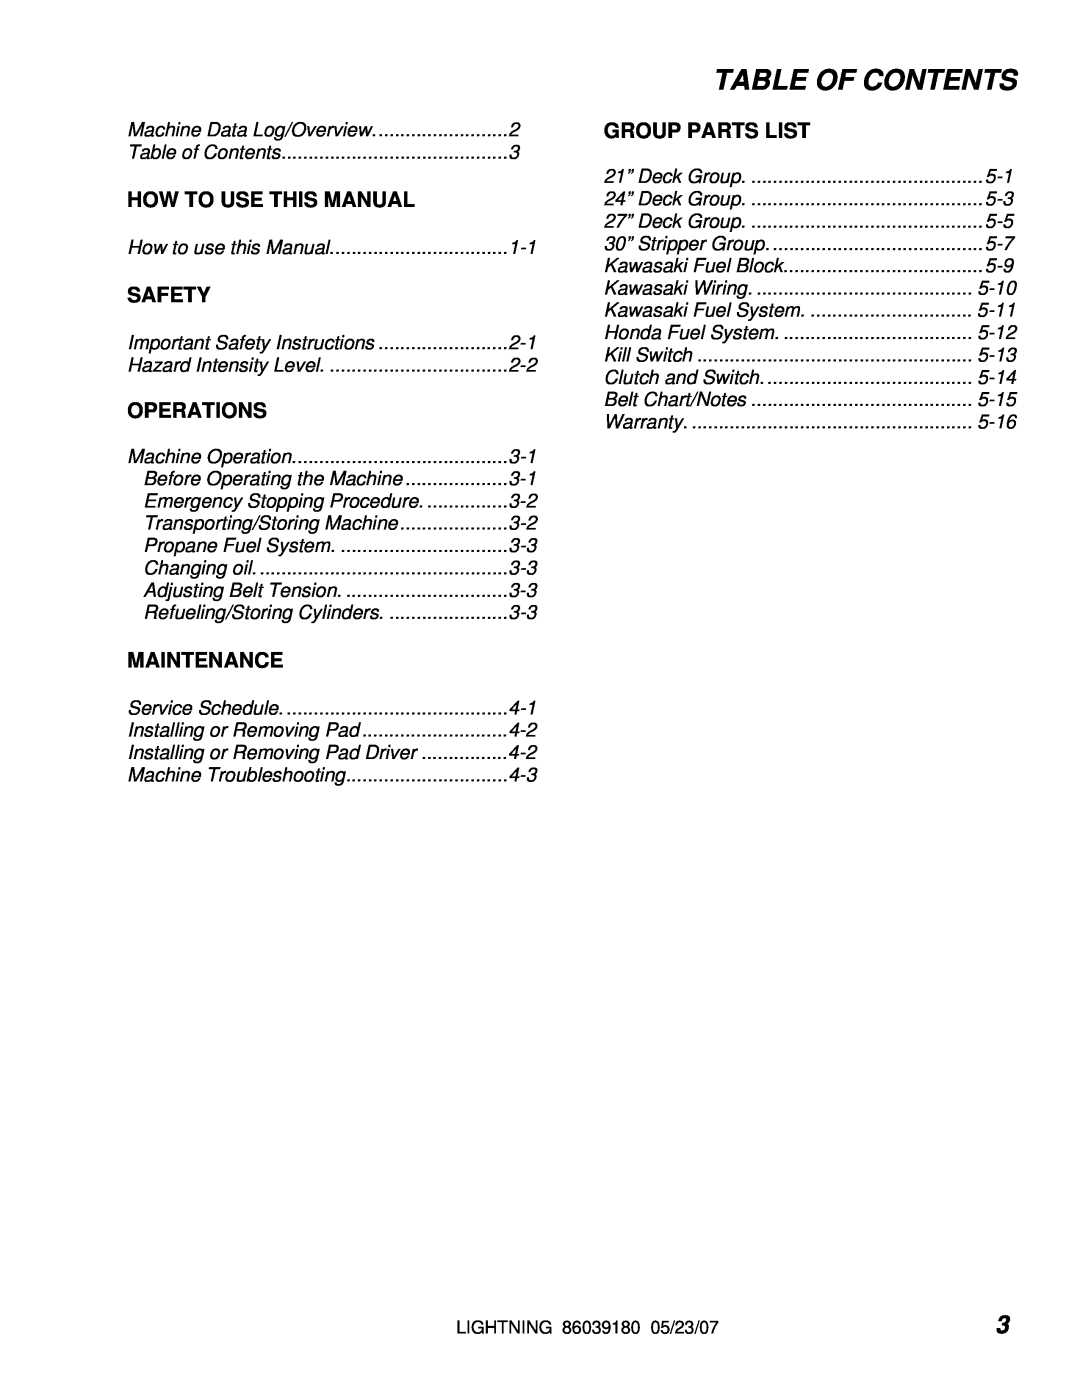 Windsor 10023070, L27ER22 Table Of Contents, How To Use This Manual, Safety, Operations, Maintenance, Group Parts List 